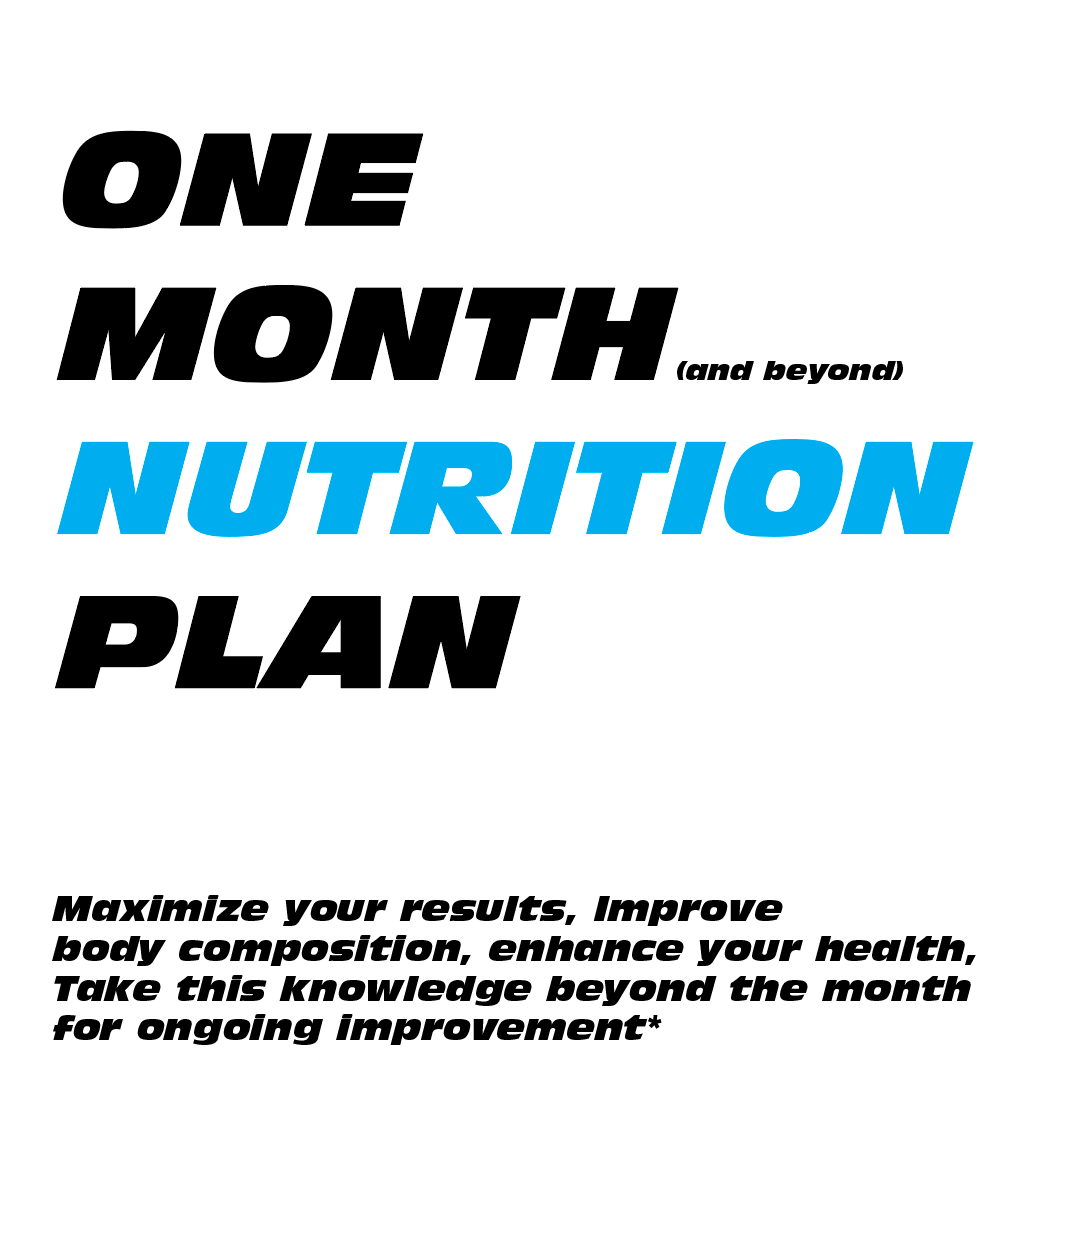 One Month Nutrition Plan